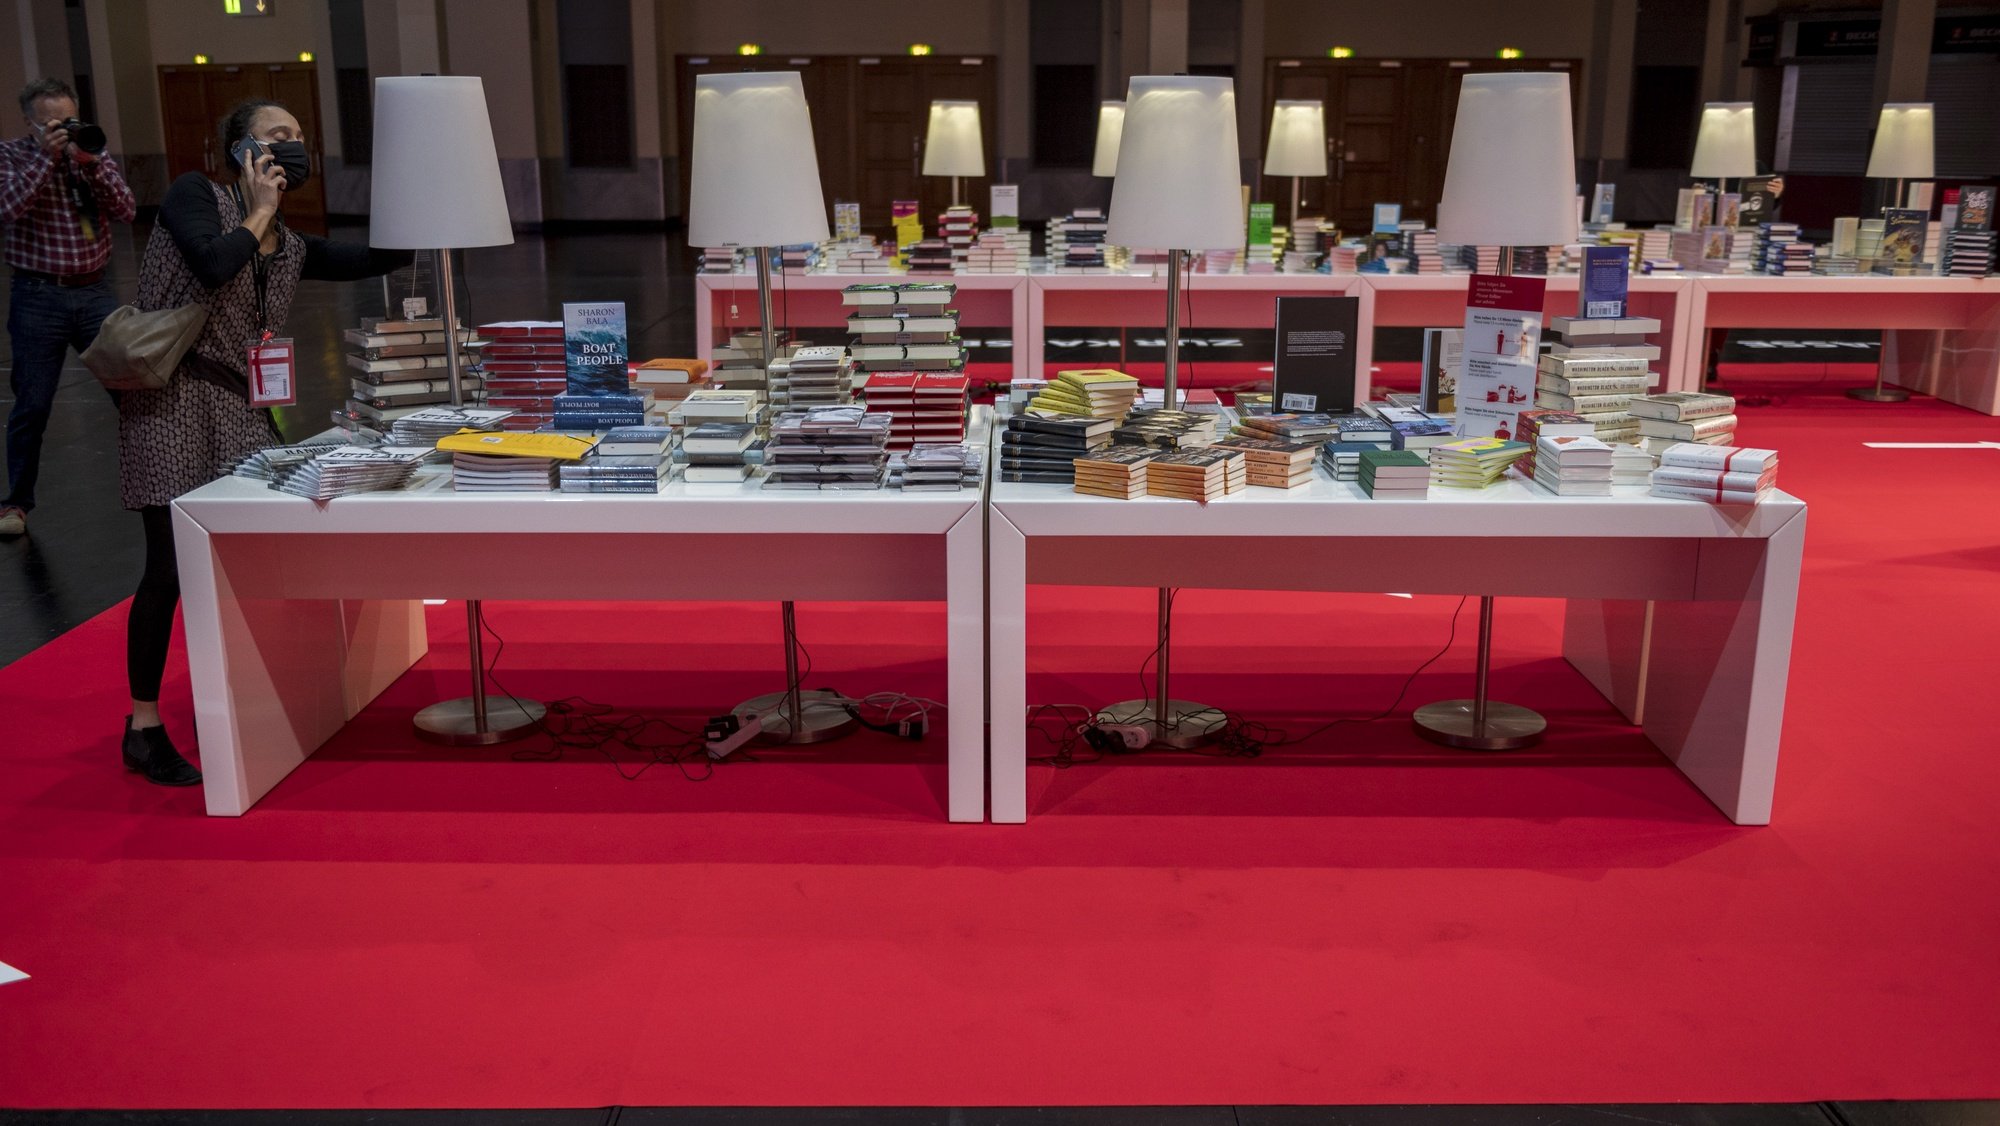 epa08740309 A general view of a table with books prior to the opening conference of the 2020 Frankfurt Book Fair during the coronavirus pandemic in the &#039;Festhalle&#039; in Frankfurt am Main, 13 October 2020. The Frankfurt Book Fair is the world&#039;s largest trade fair for books but is taking place this year at a much smaller scale and with many events either online or scattered throughout the city of Frankfurt due to the coronavirus pandemic. This year&#039;s Special Edition of the Book Fair takes place from 14 October to 18 October 2020.  EPA/THOMAS LOHNES / POOL